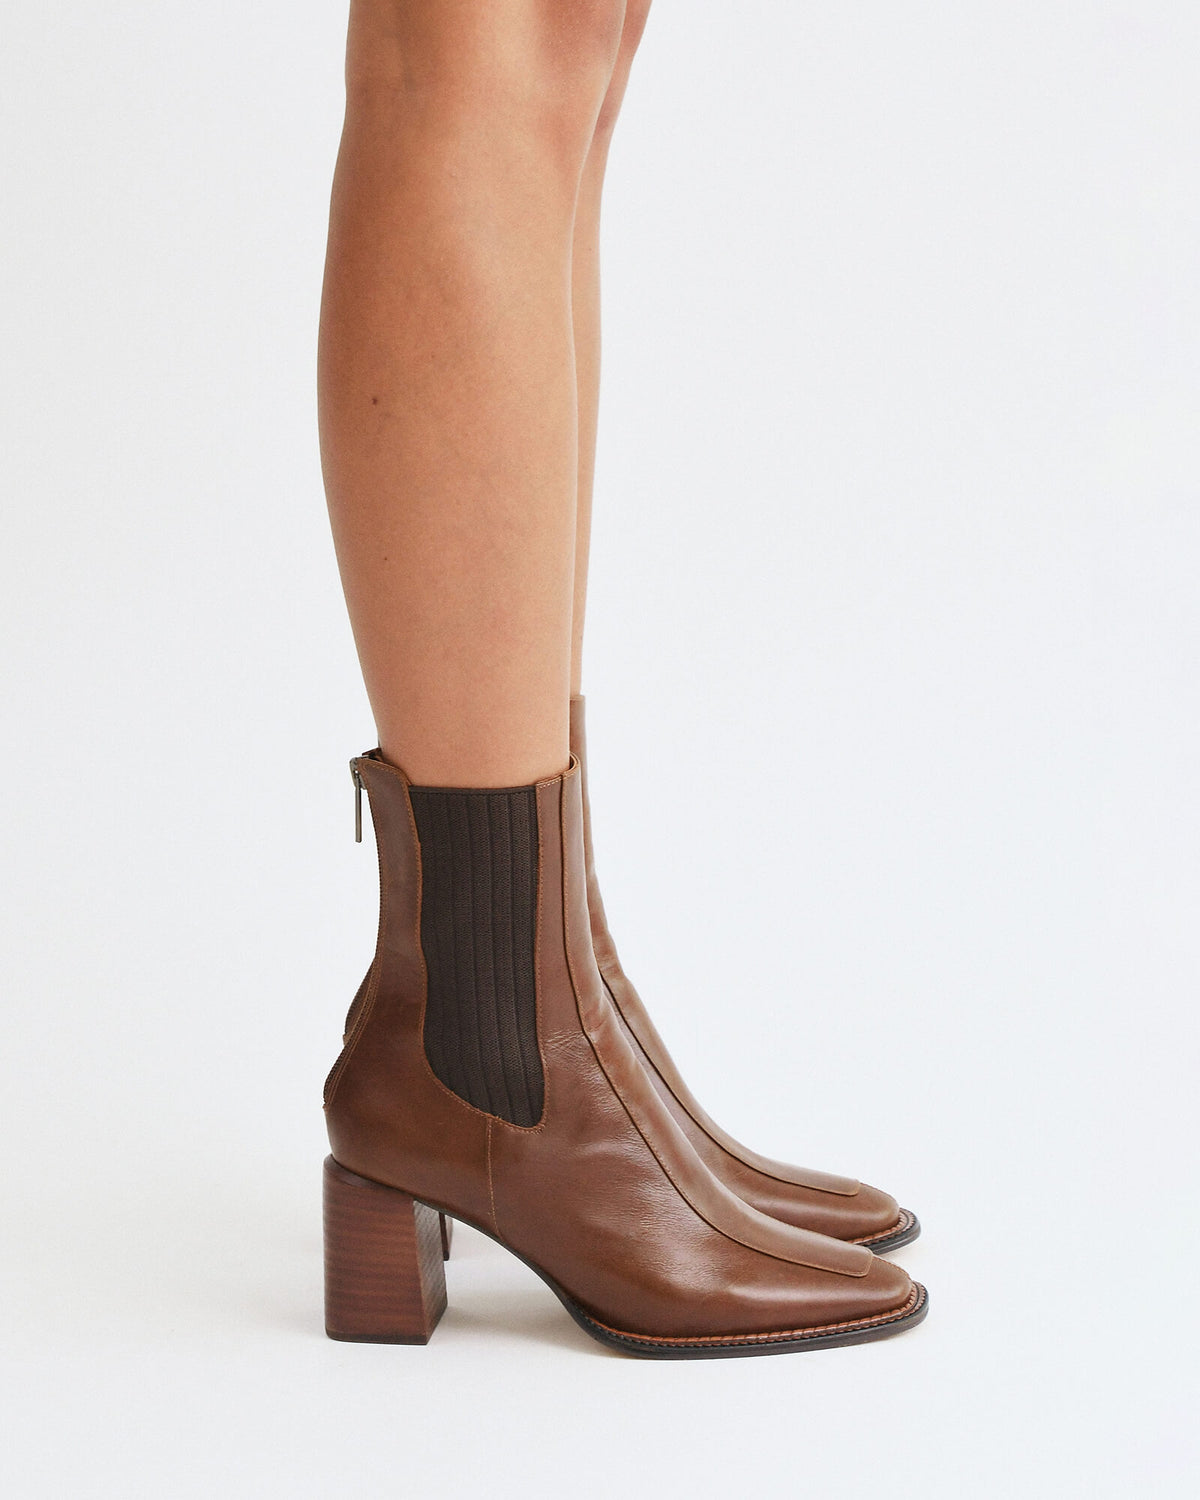 DEVINA MID ANKLE BOOTS DARK CHOC LEATHER